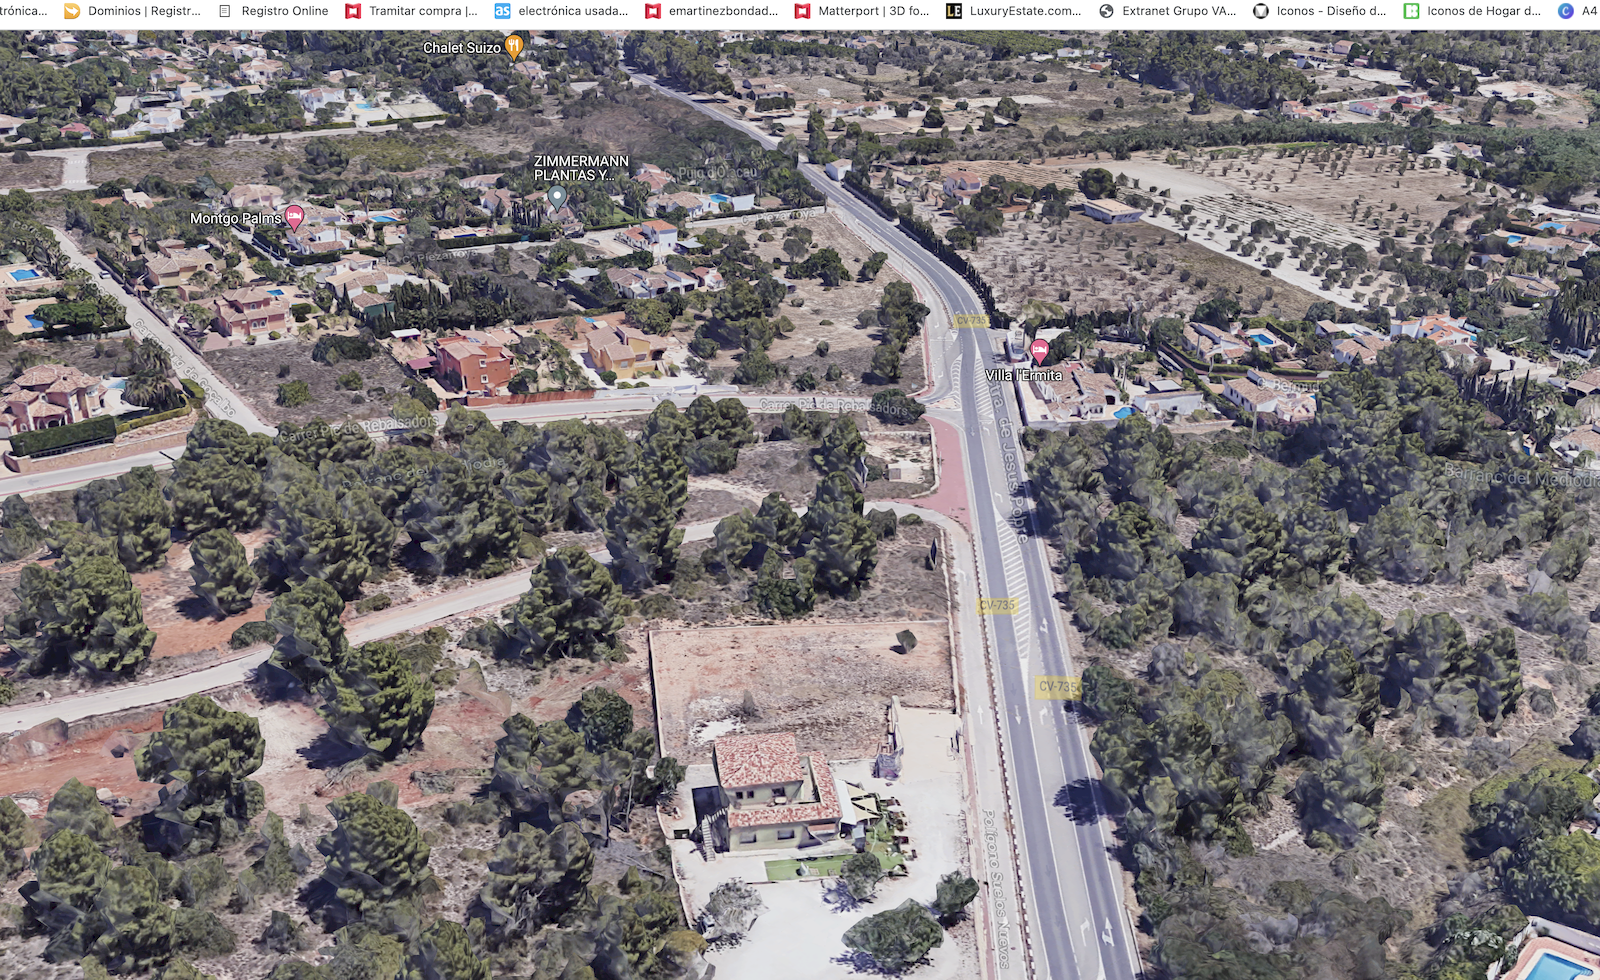 Commercial Plot for sale in Javea.